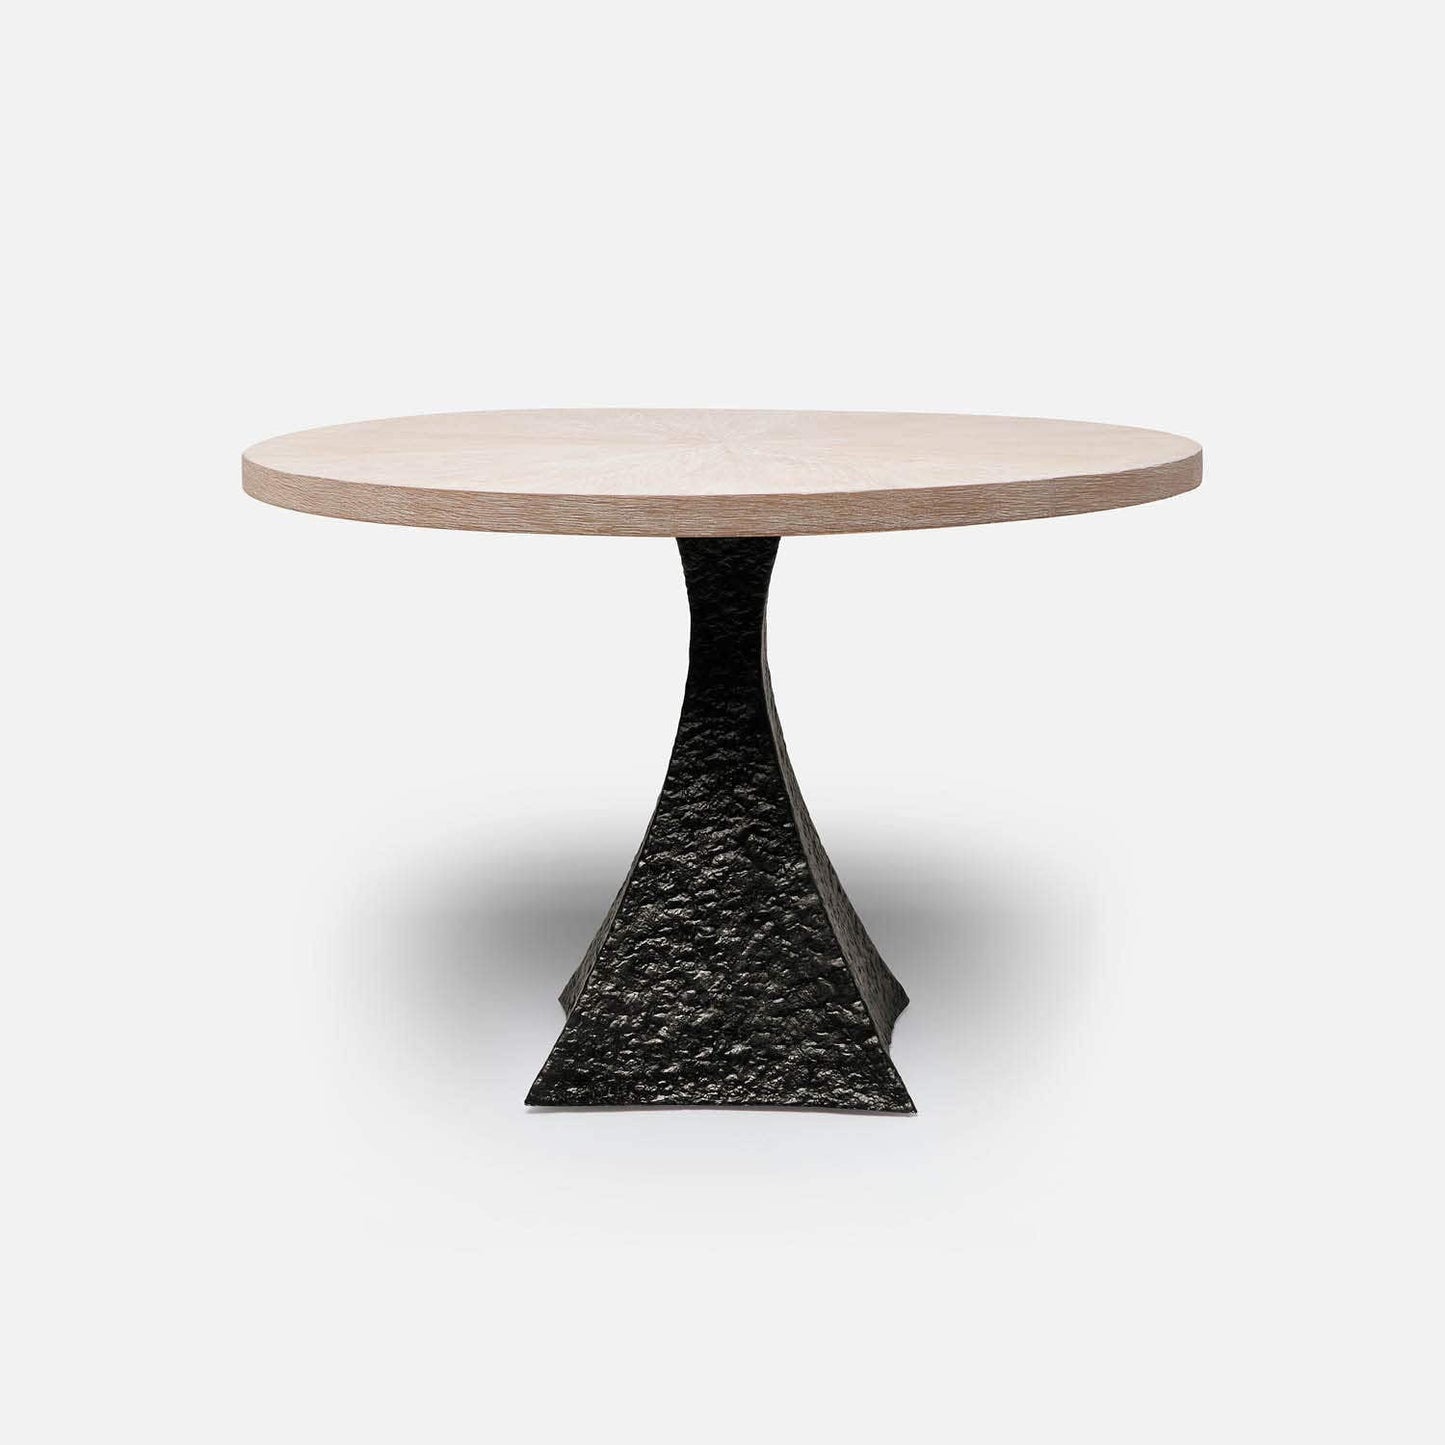 Made Goods Noor 48" x 30" Bumpy Black Iron Dinning Table With Round White Cerused Oak Table Top